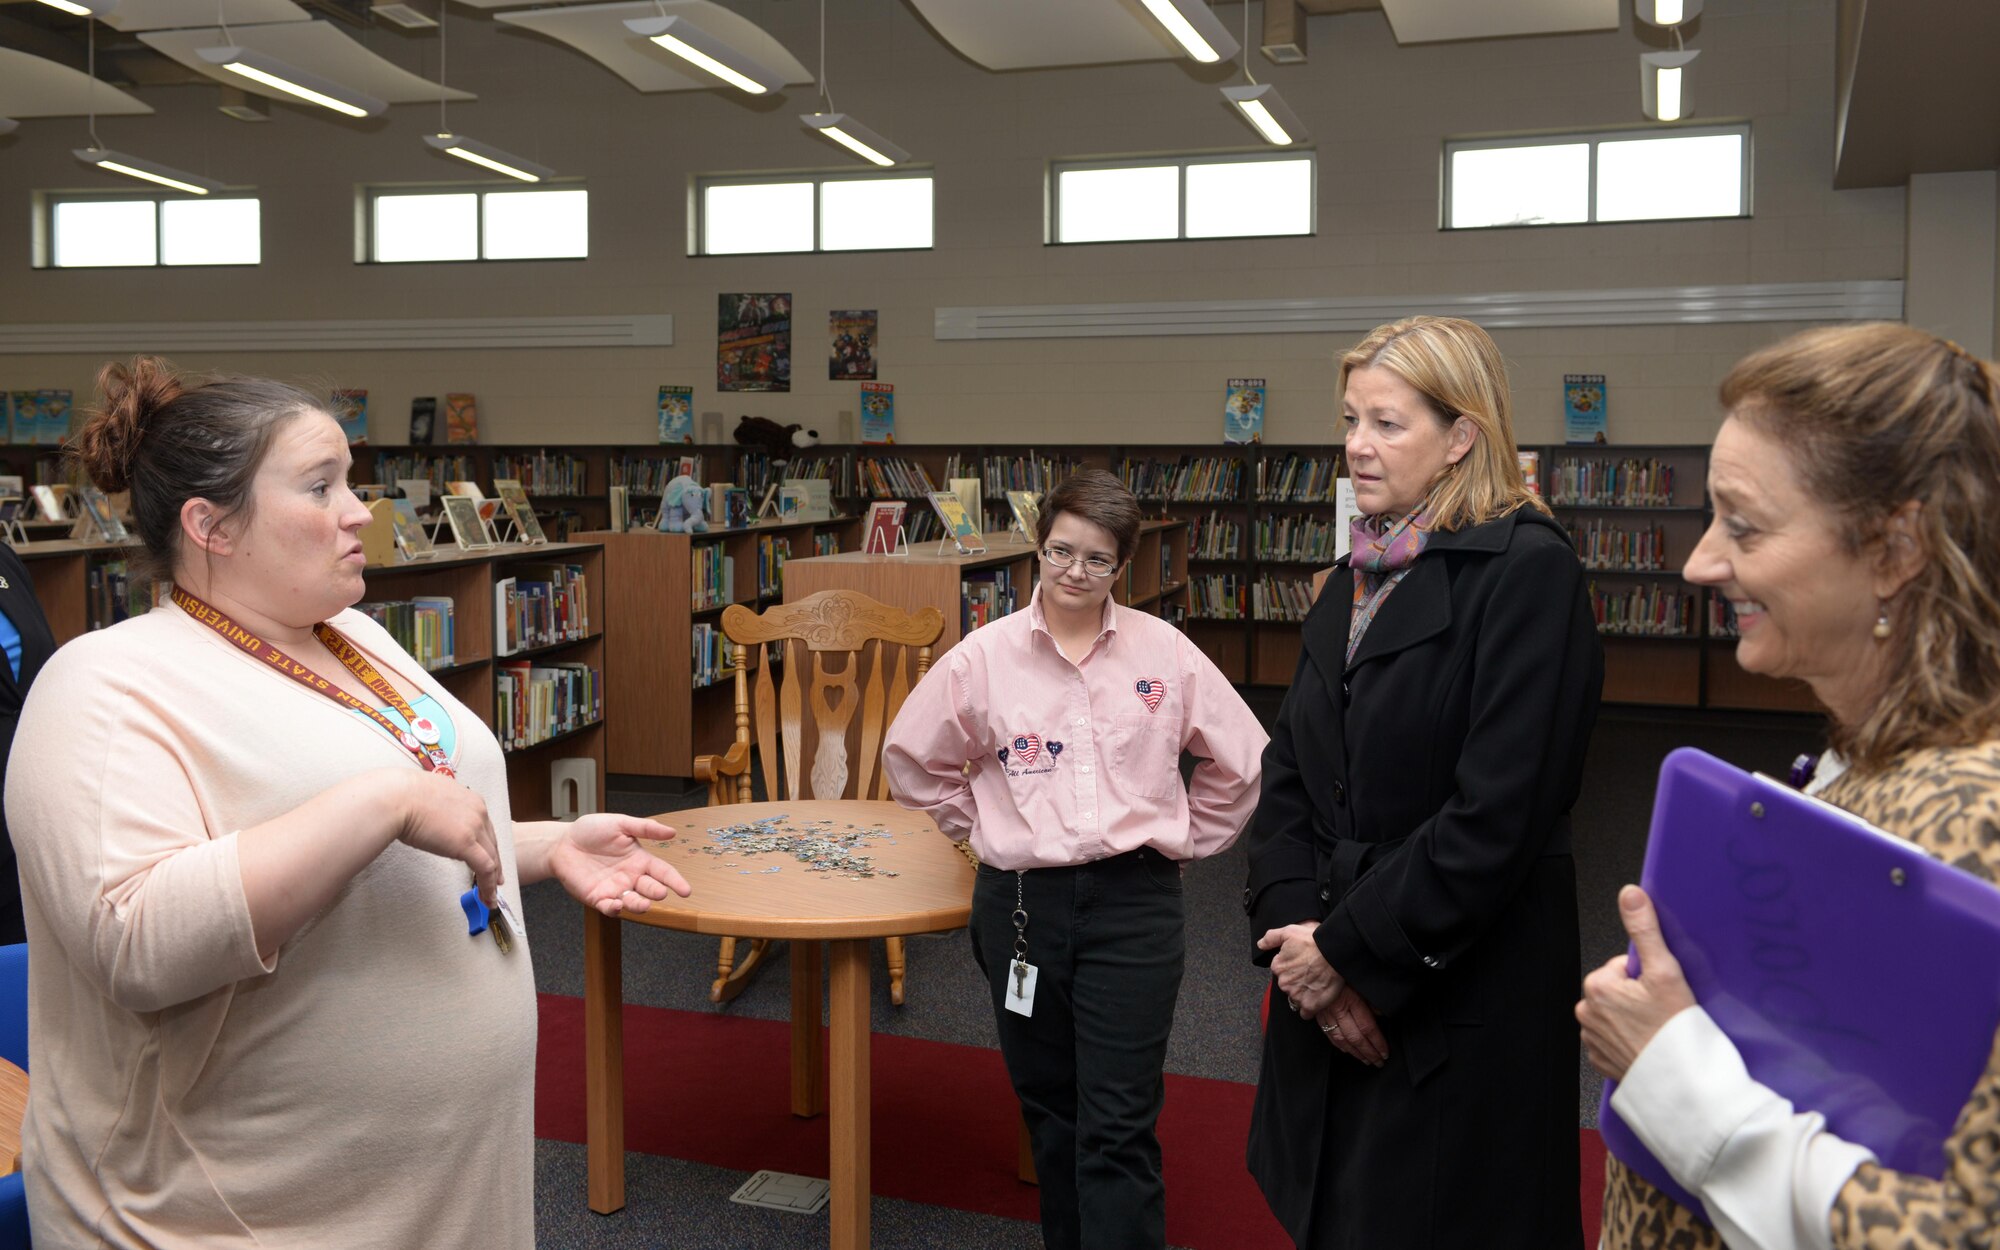 Kim Rand, wife of AFGSC commander Gen. Robin Rand, learns about the Vandenberg Elementary School’s library in Box Elder, S.D., April 27, 2016. The new Vandenberg campus opened its doors during the 2015-2016 schoolyear, and was funded with a combination of Department of Education and Department of Defense grants, and Impact Aid funds. (Air Force photo by Airman Donald C. Knechtel)